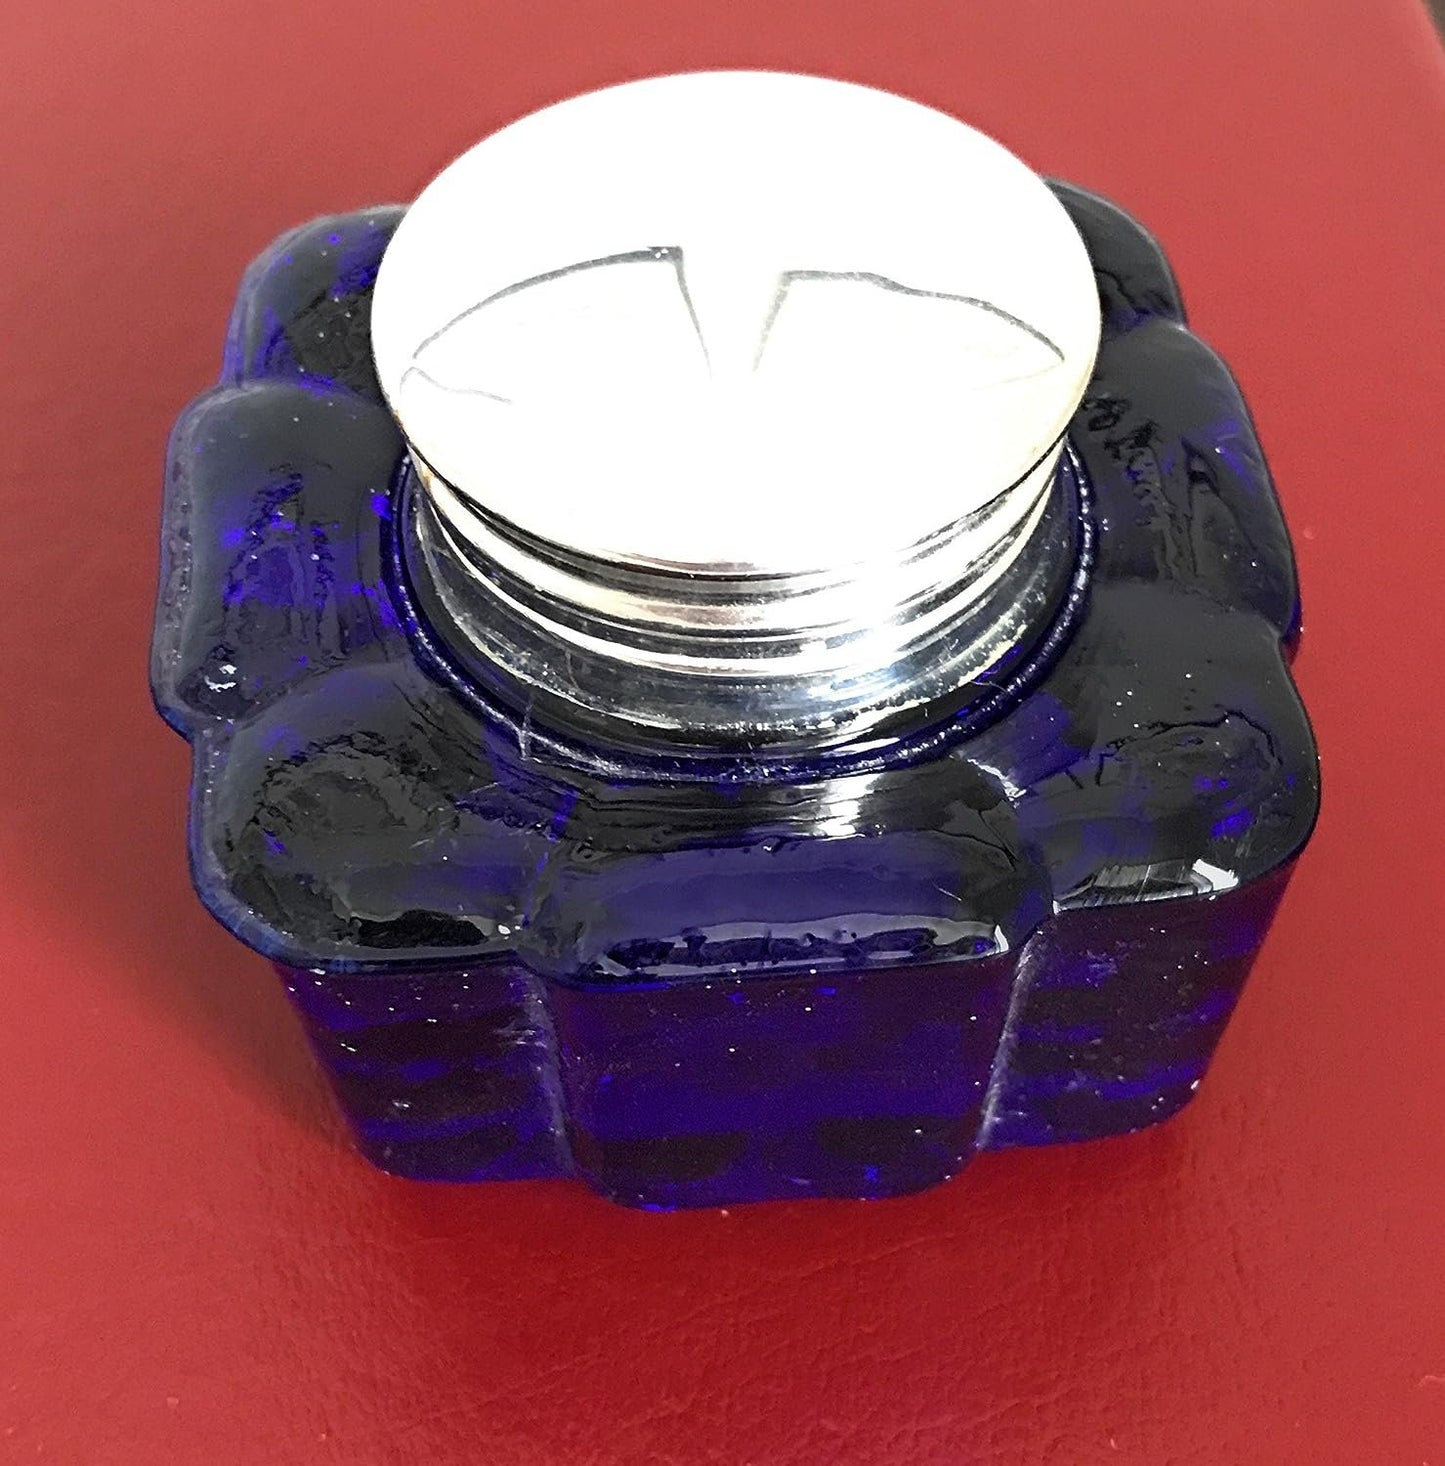 Madison Bay Company Fluted Square Glass Inkwell, Cobalt Blue, 2.875 Inches Square by 2.5 Inches Tall